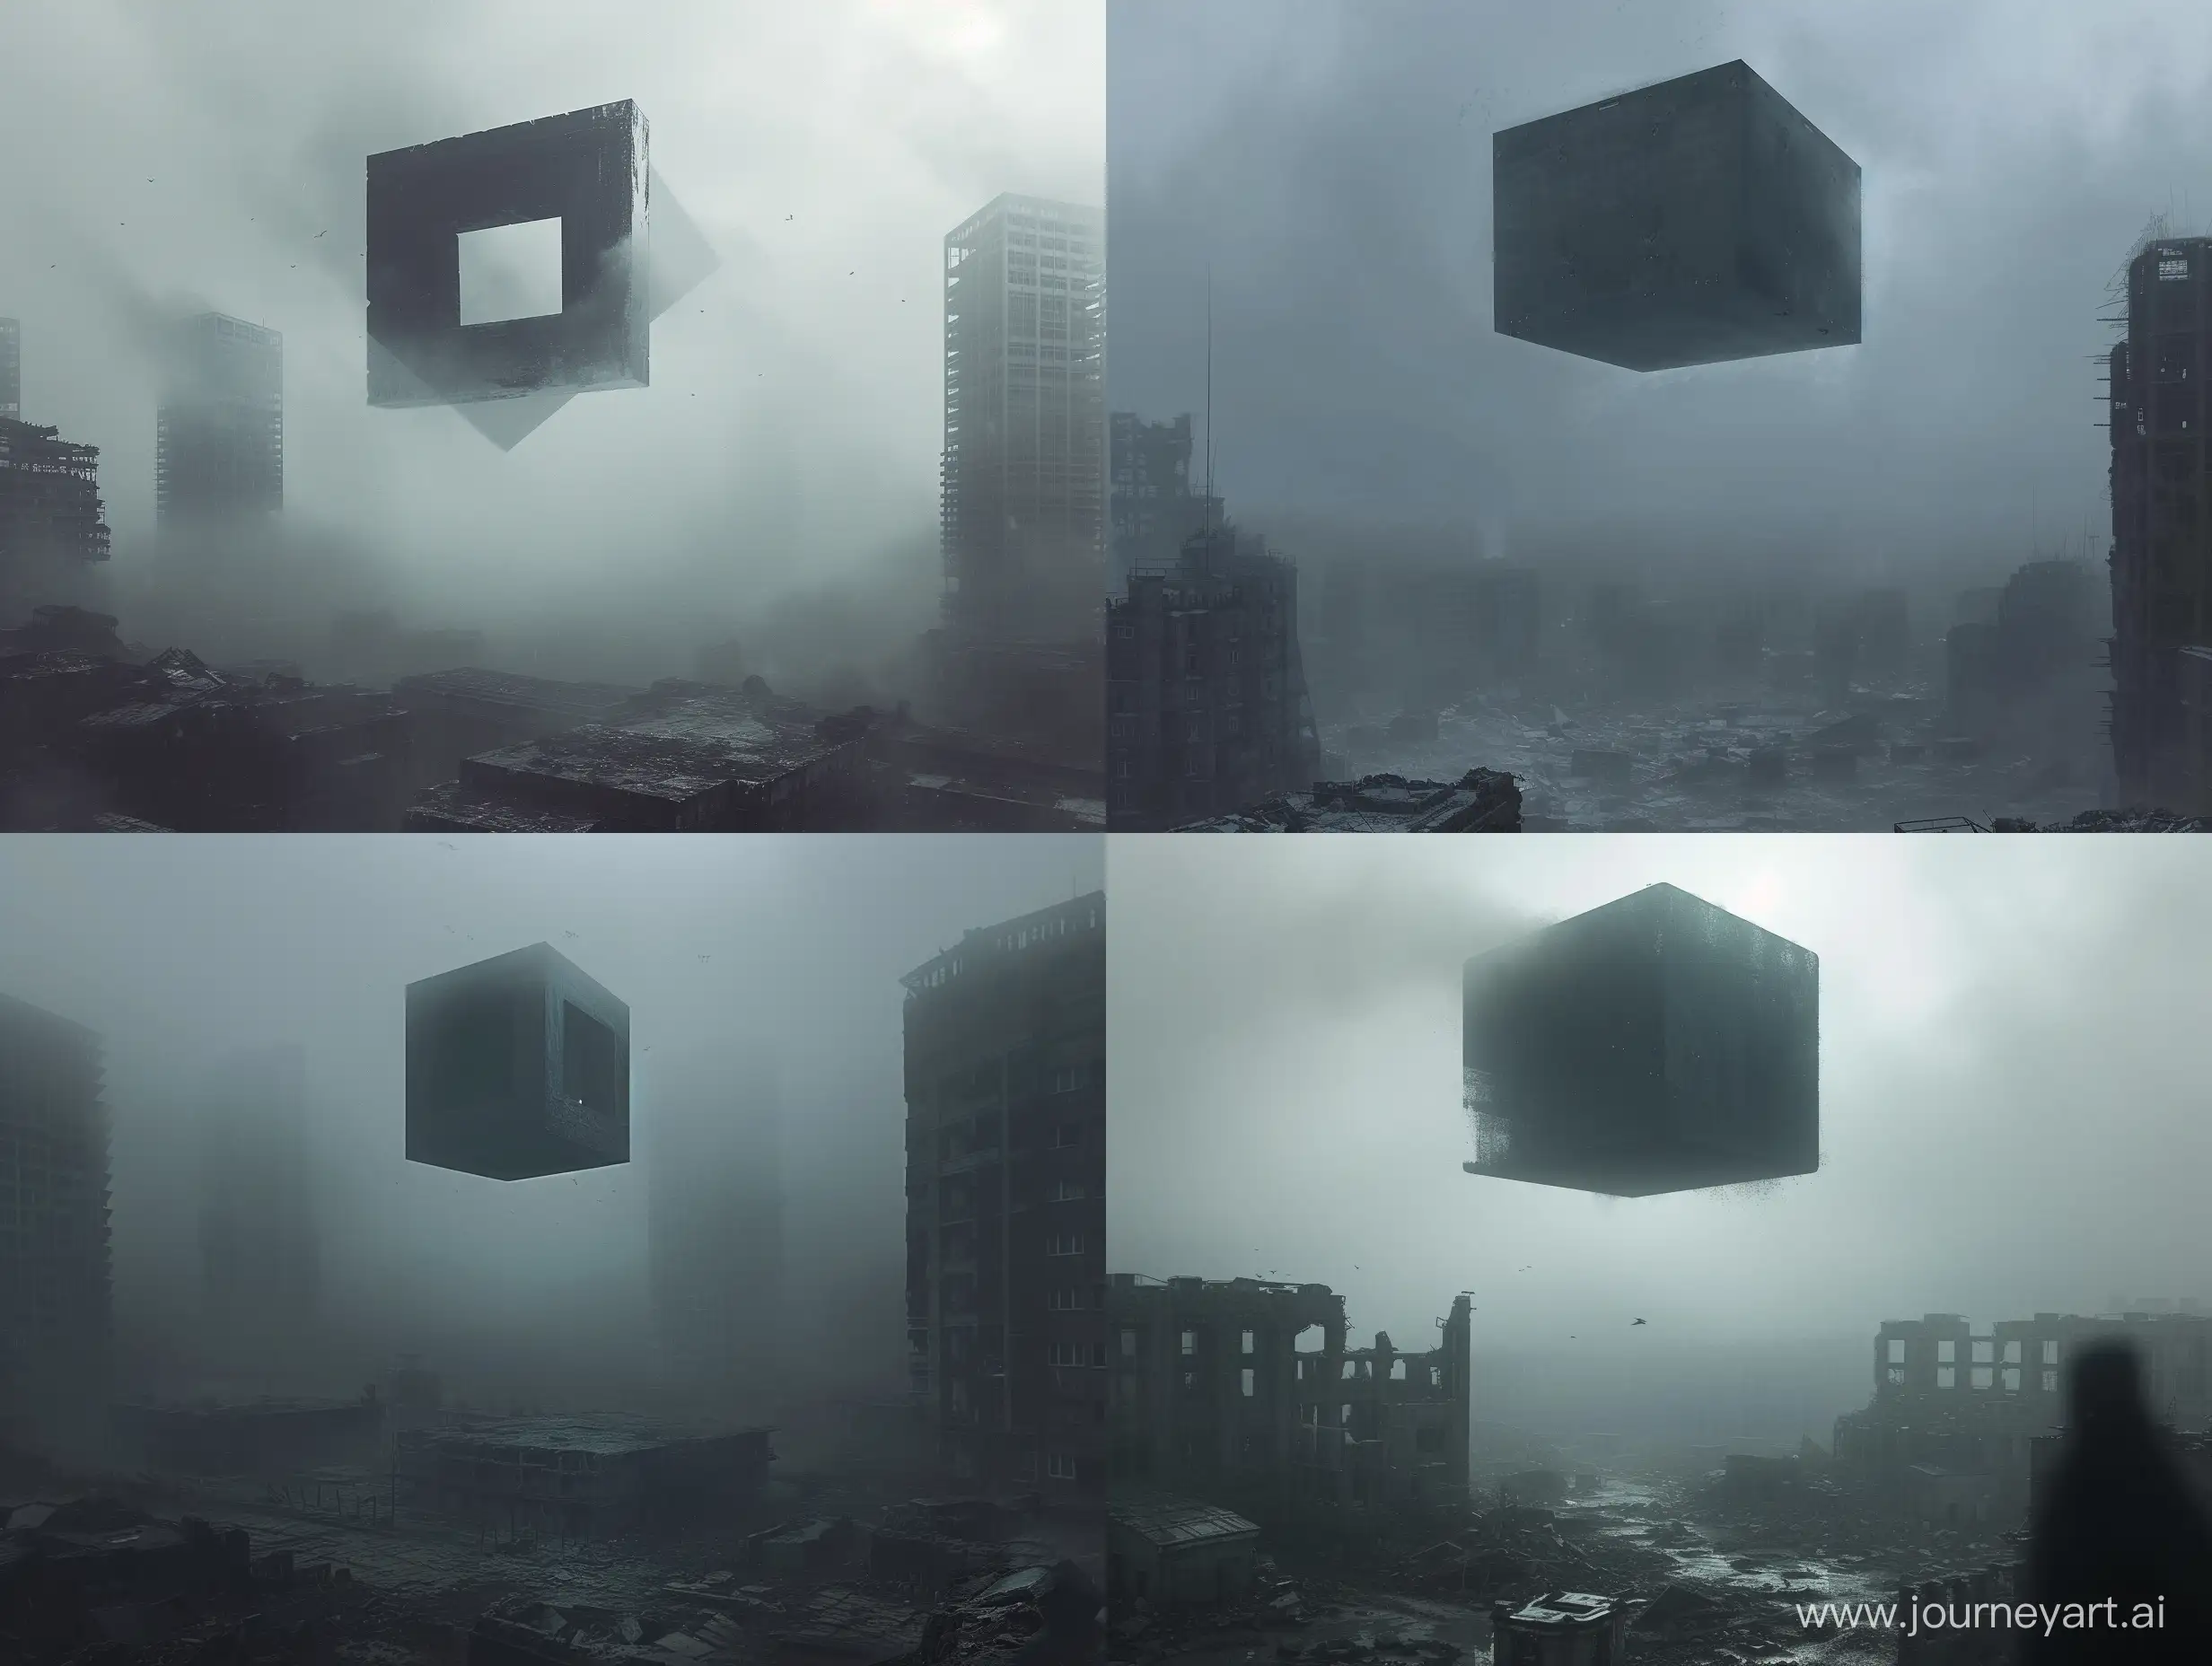 concept art by Alexey Andreev concept art dark scp bioarchitecture, flying square object, foggy weather, hovering over city ruins
